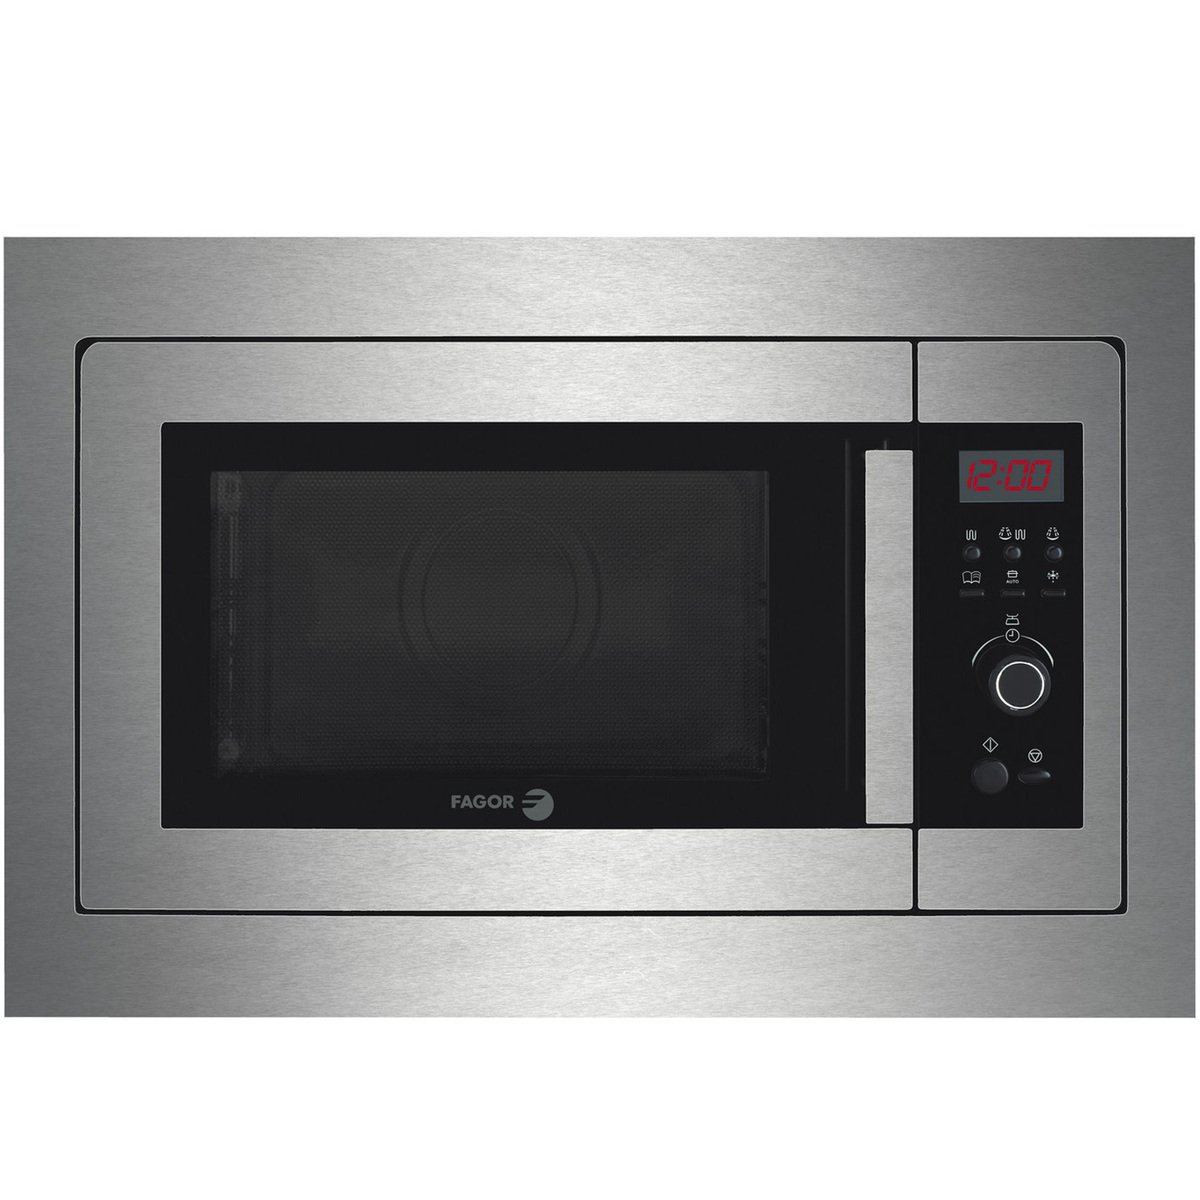 Fagor Built-In Microwave Oven MWB23AEGXU 23Ltr